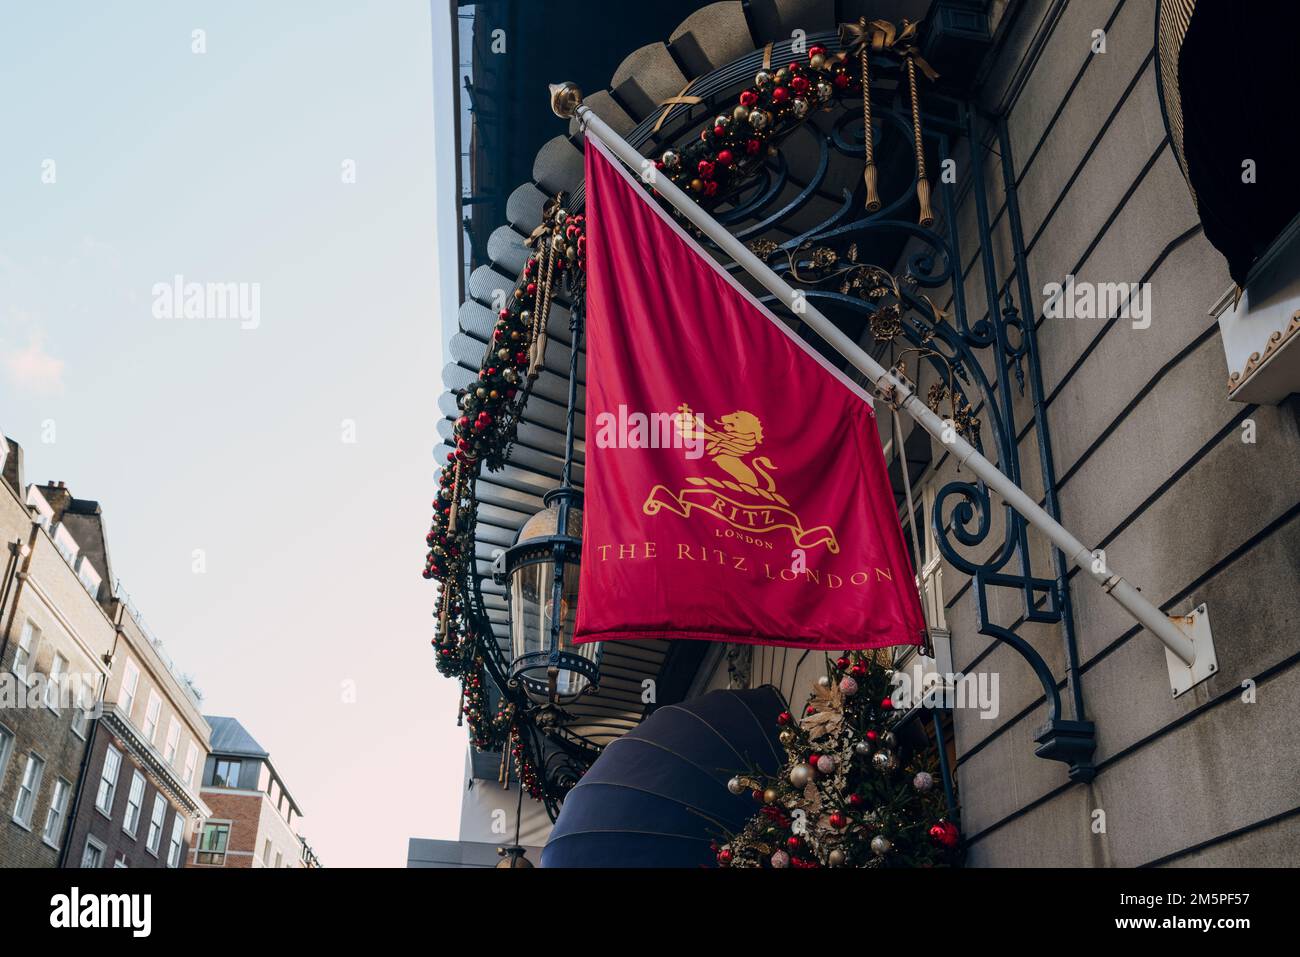 London, UK - December 26, 2022: Named flag on a pole by the entrance to The Ritz, London's most iconic hotel. Stock Photo